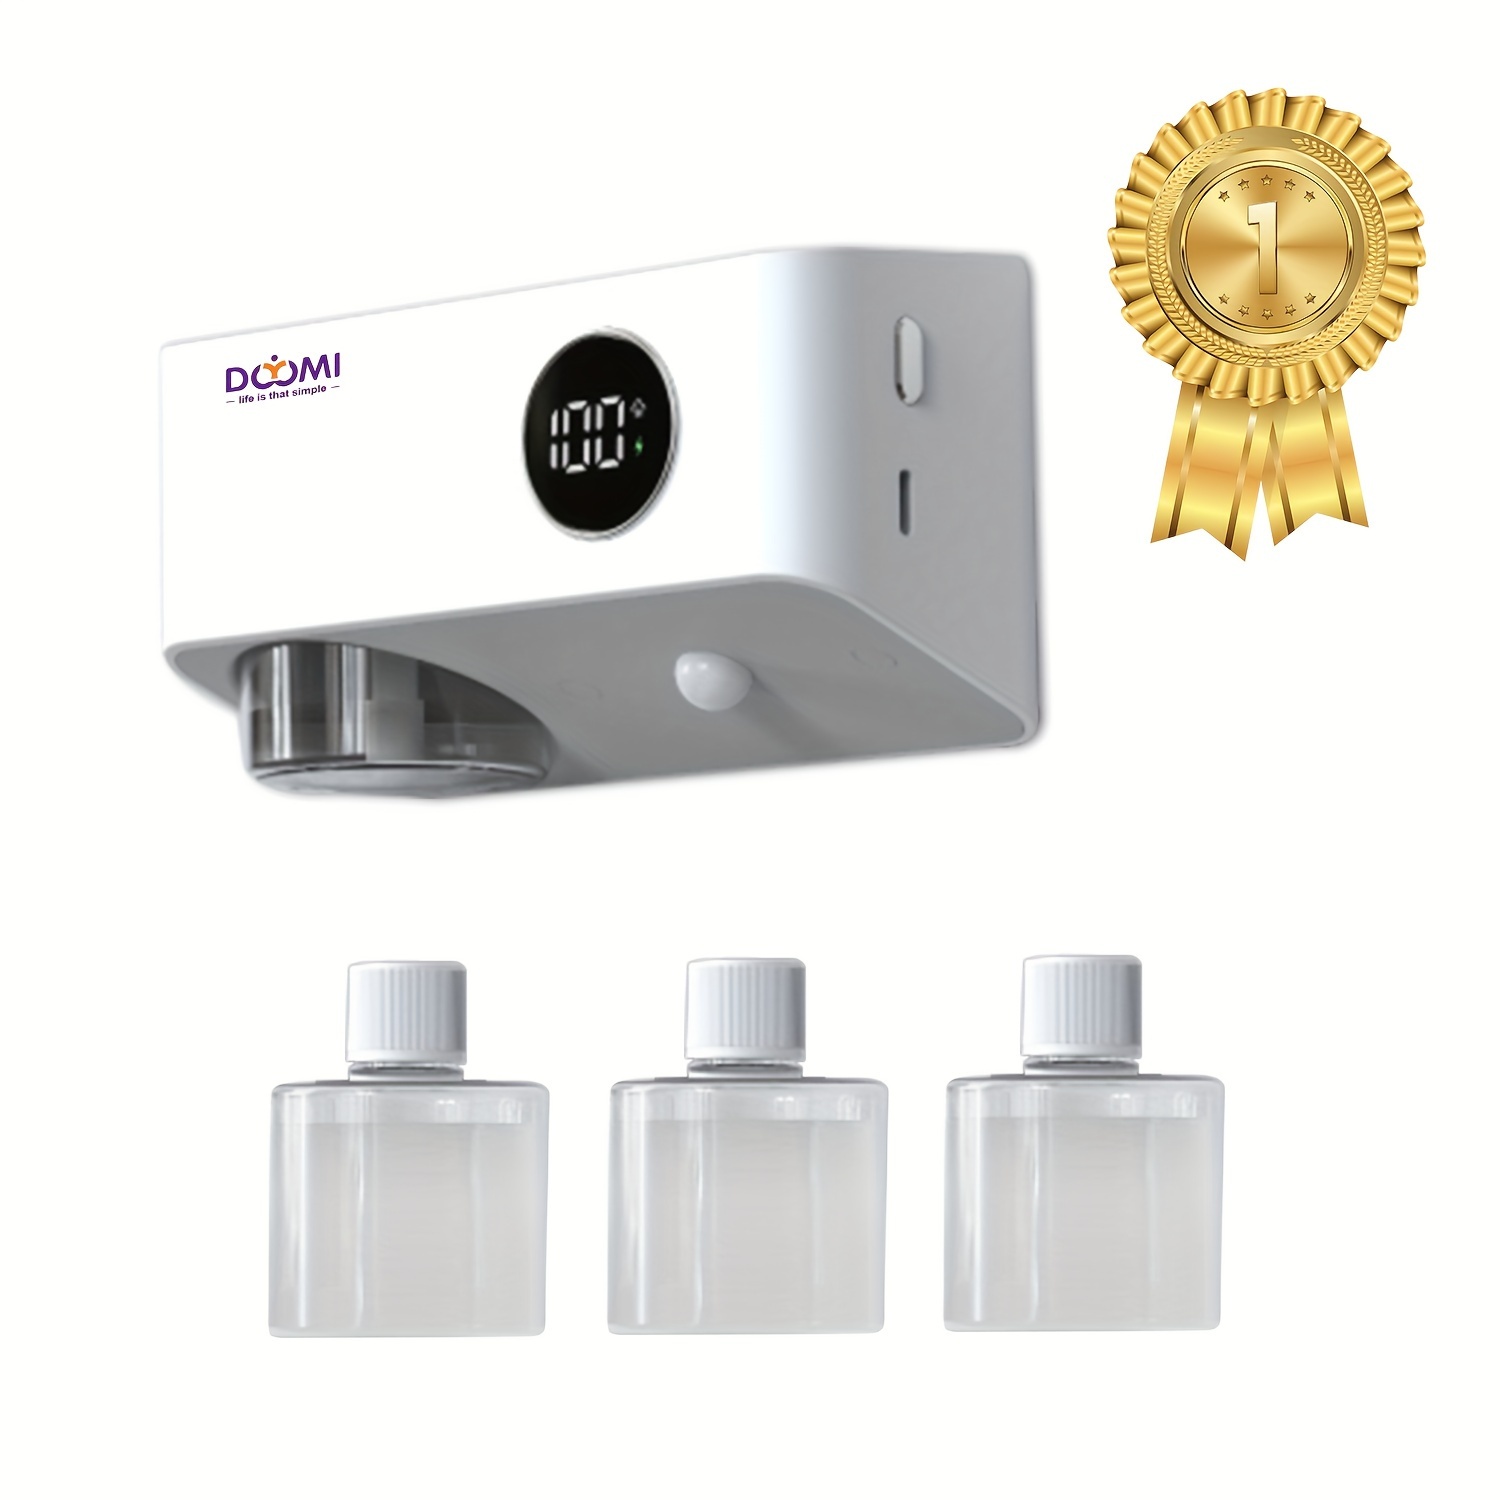 

Smart Home Diffuser, Induction Diffuser, Long-lasting Fragrance, Suitable For Bedrooms, Living Rooms, And Bathrooms